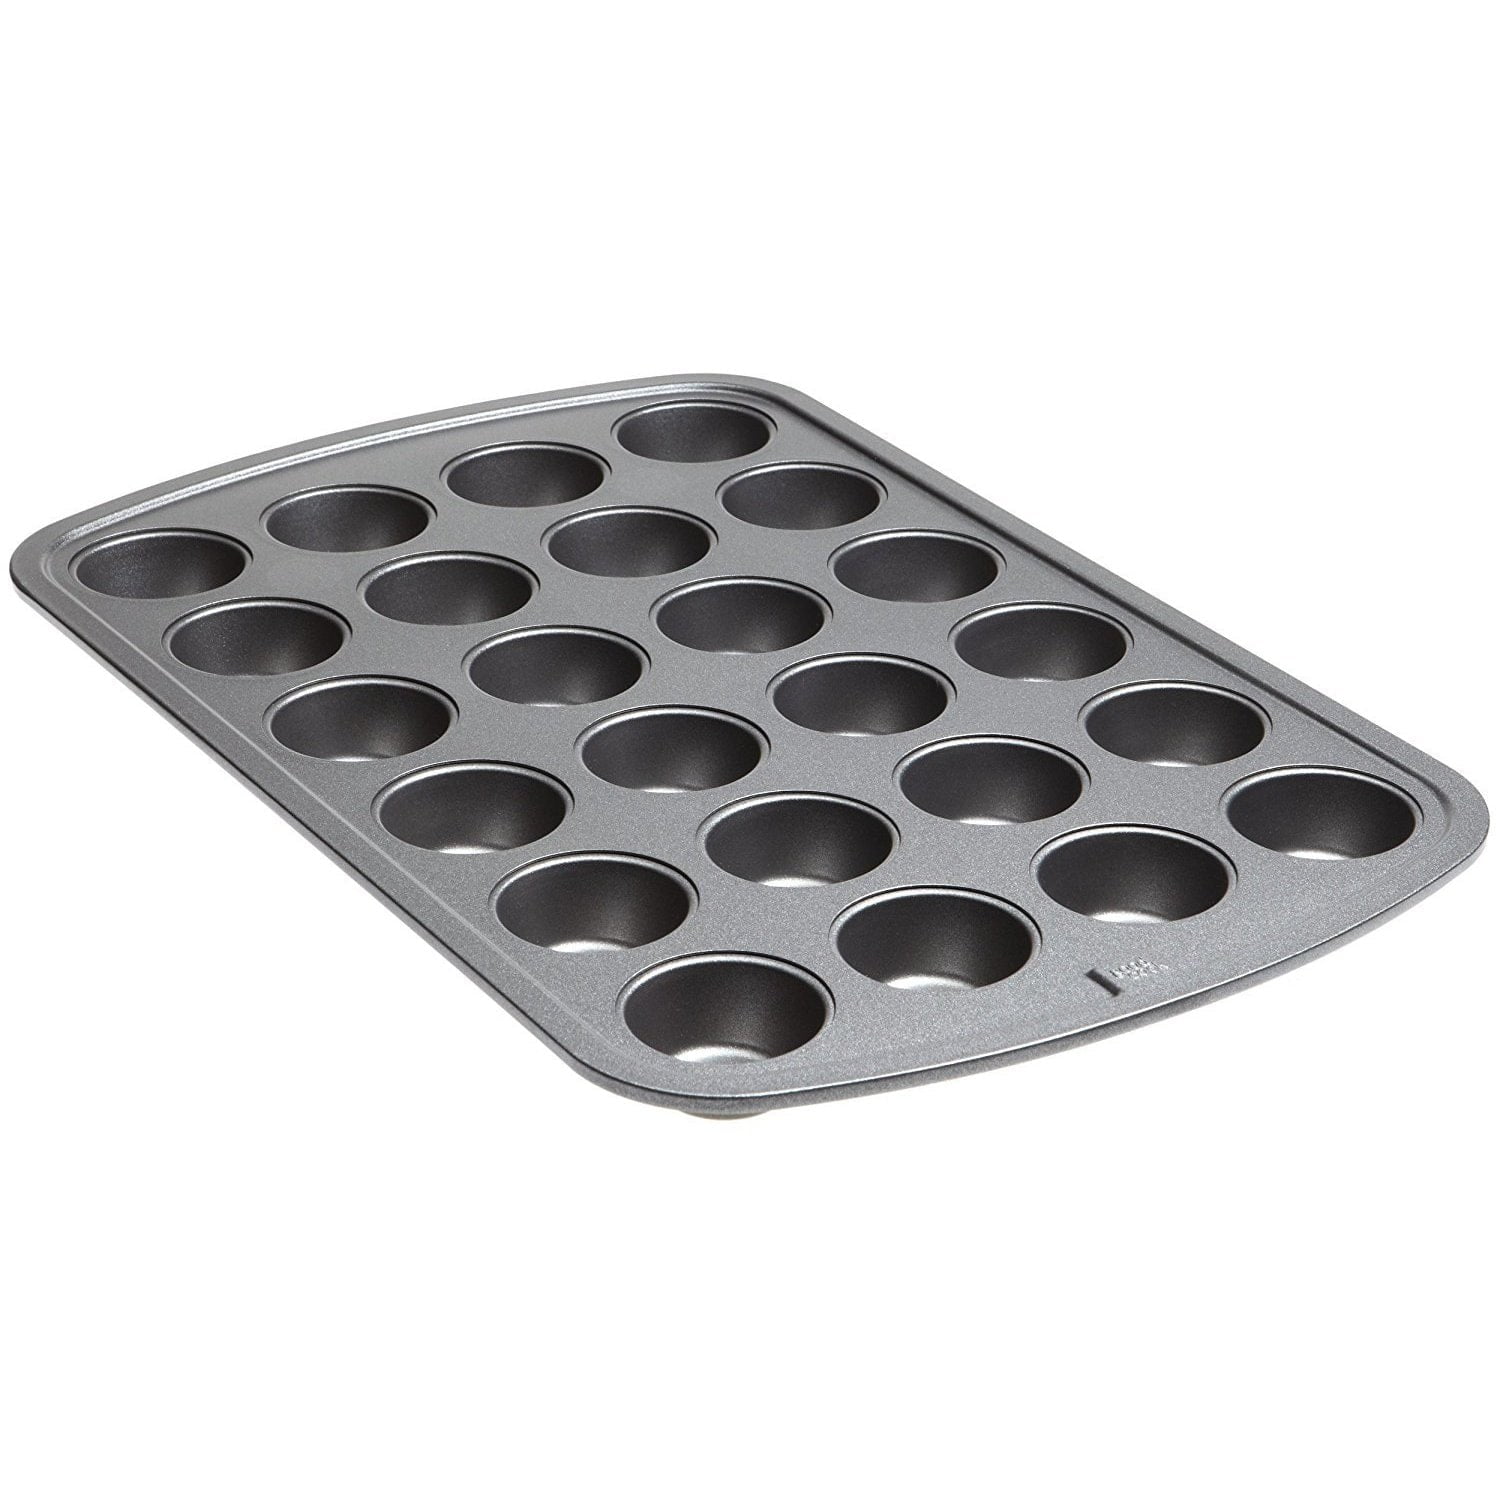 Mini Cupcake and Muffin Pan • Your Guide to American Made Products